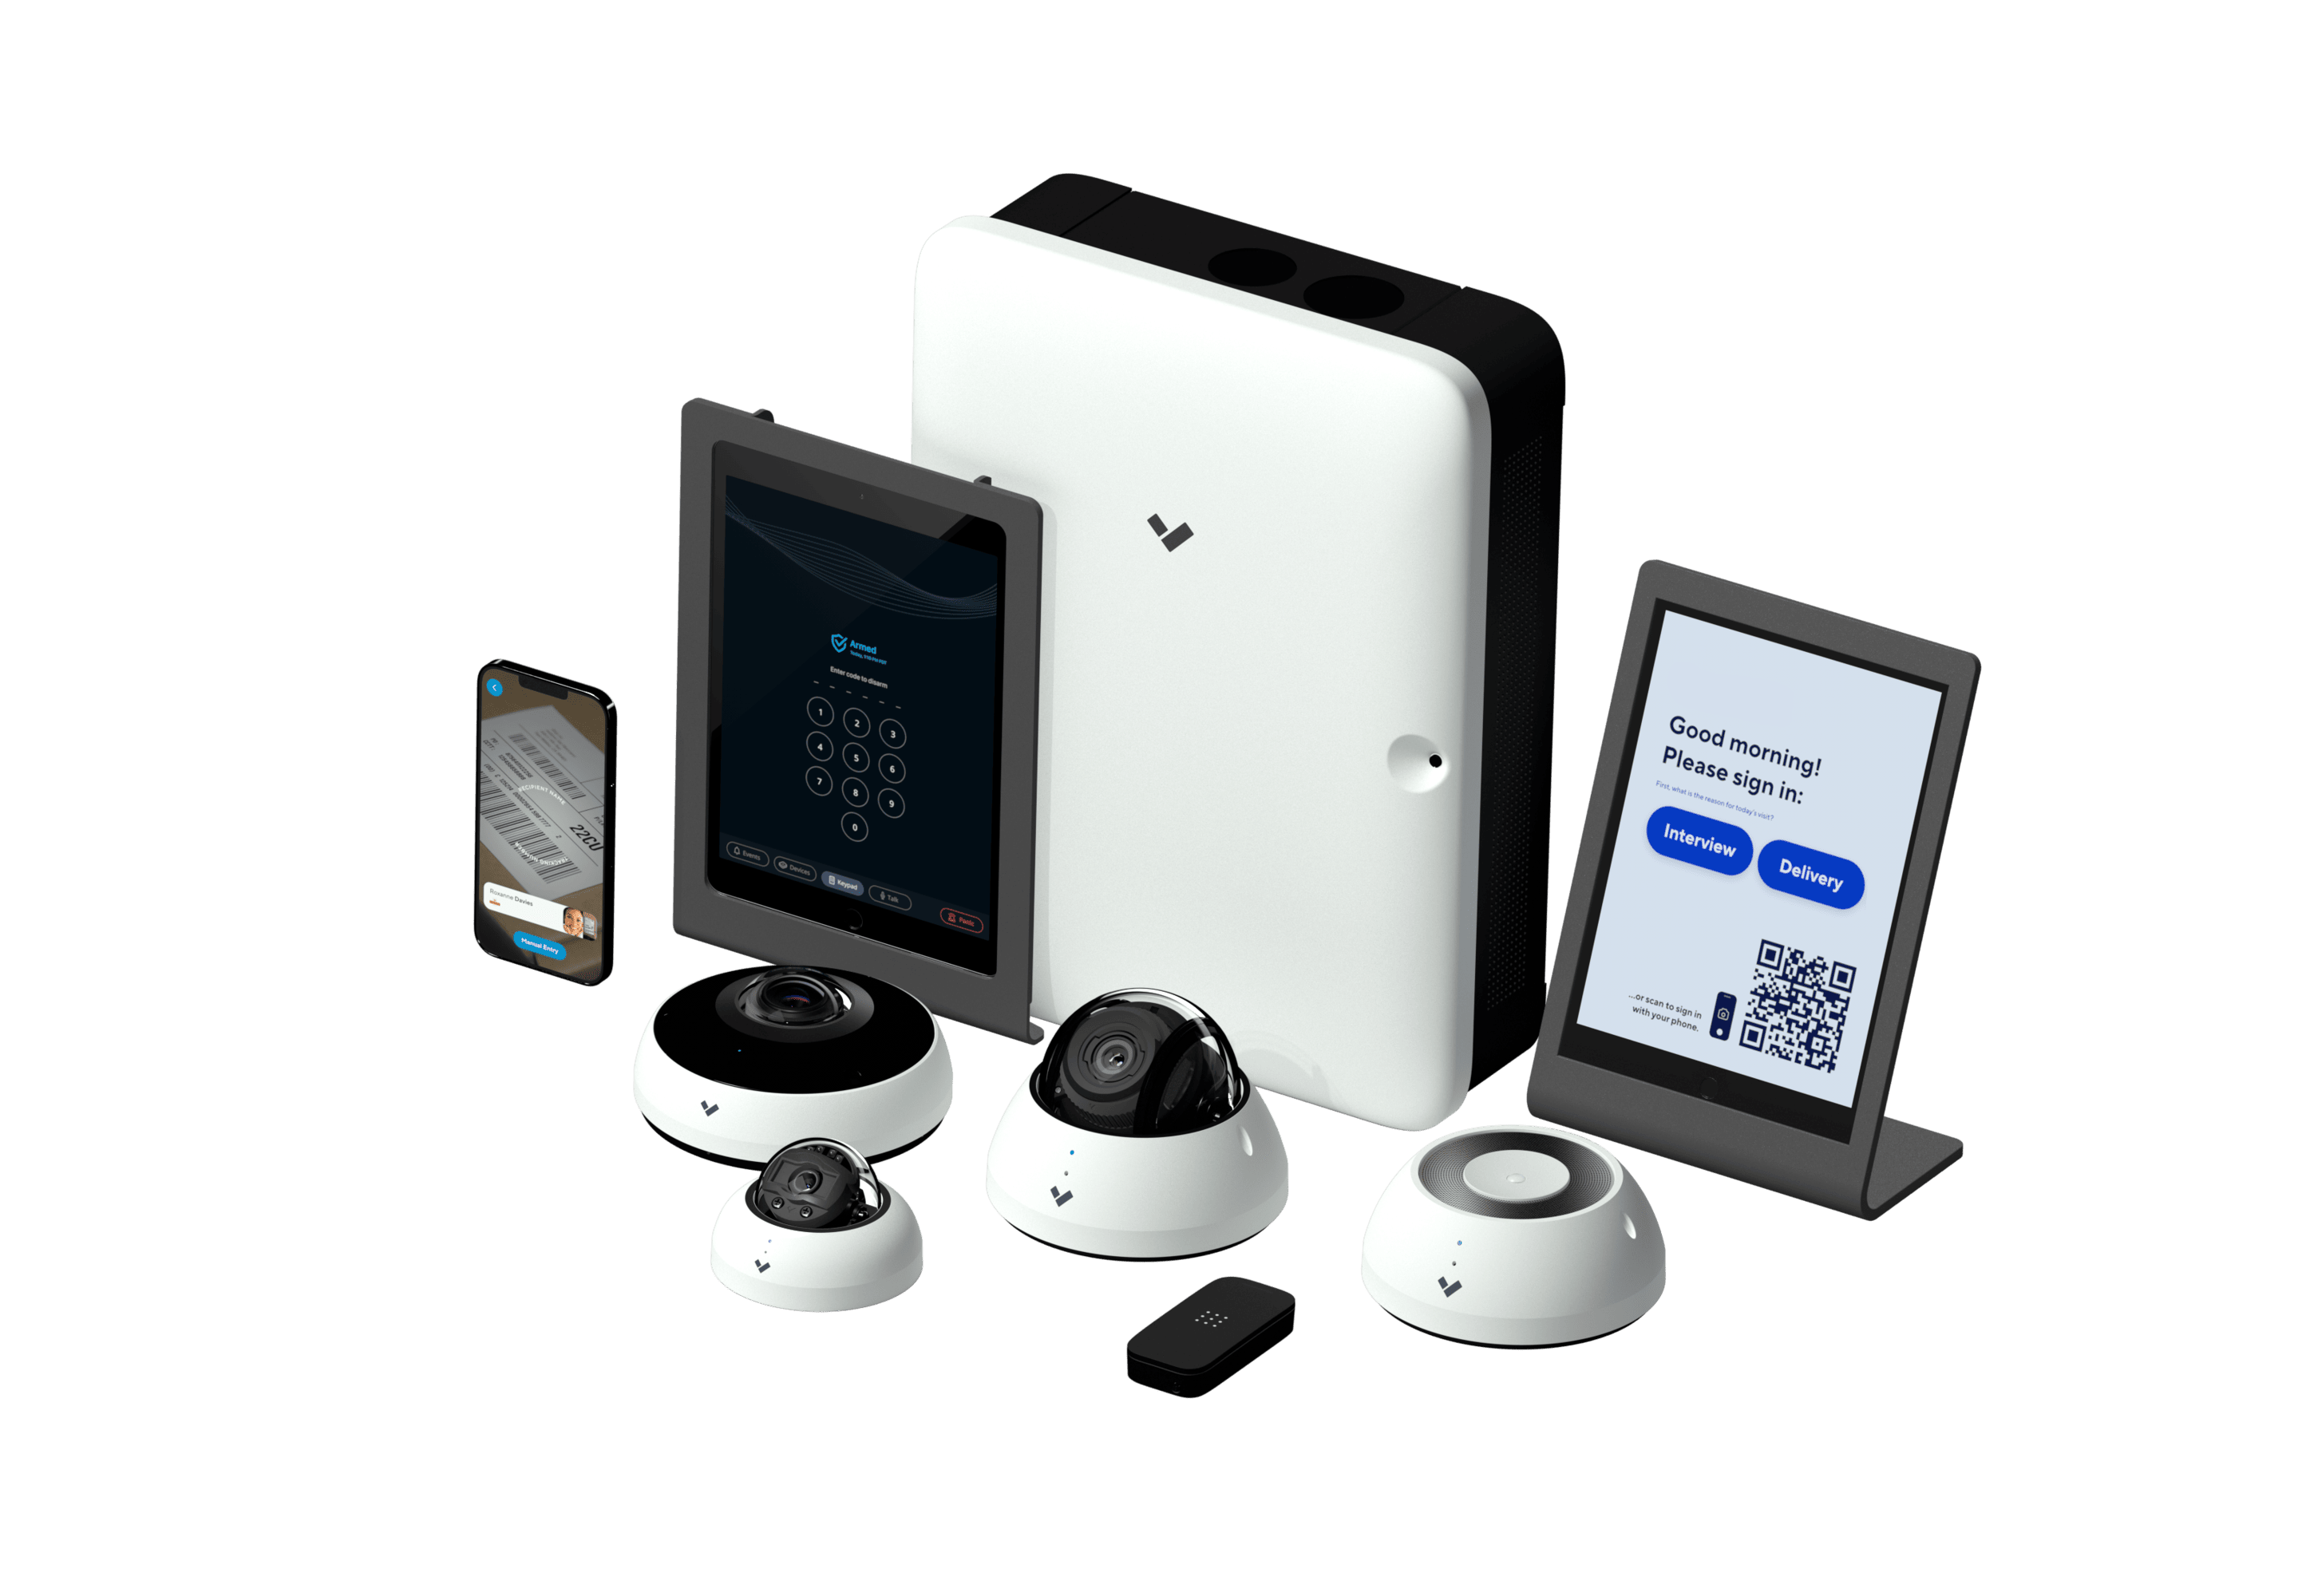 Verkada Device Family for security camera monitoring services